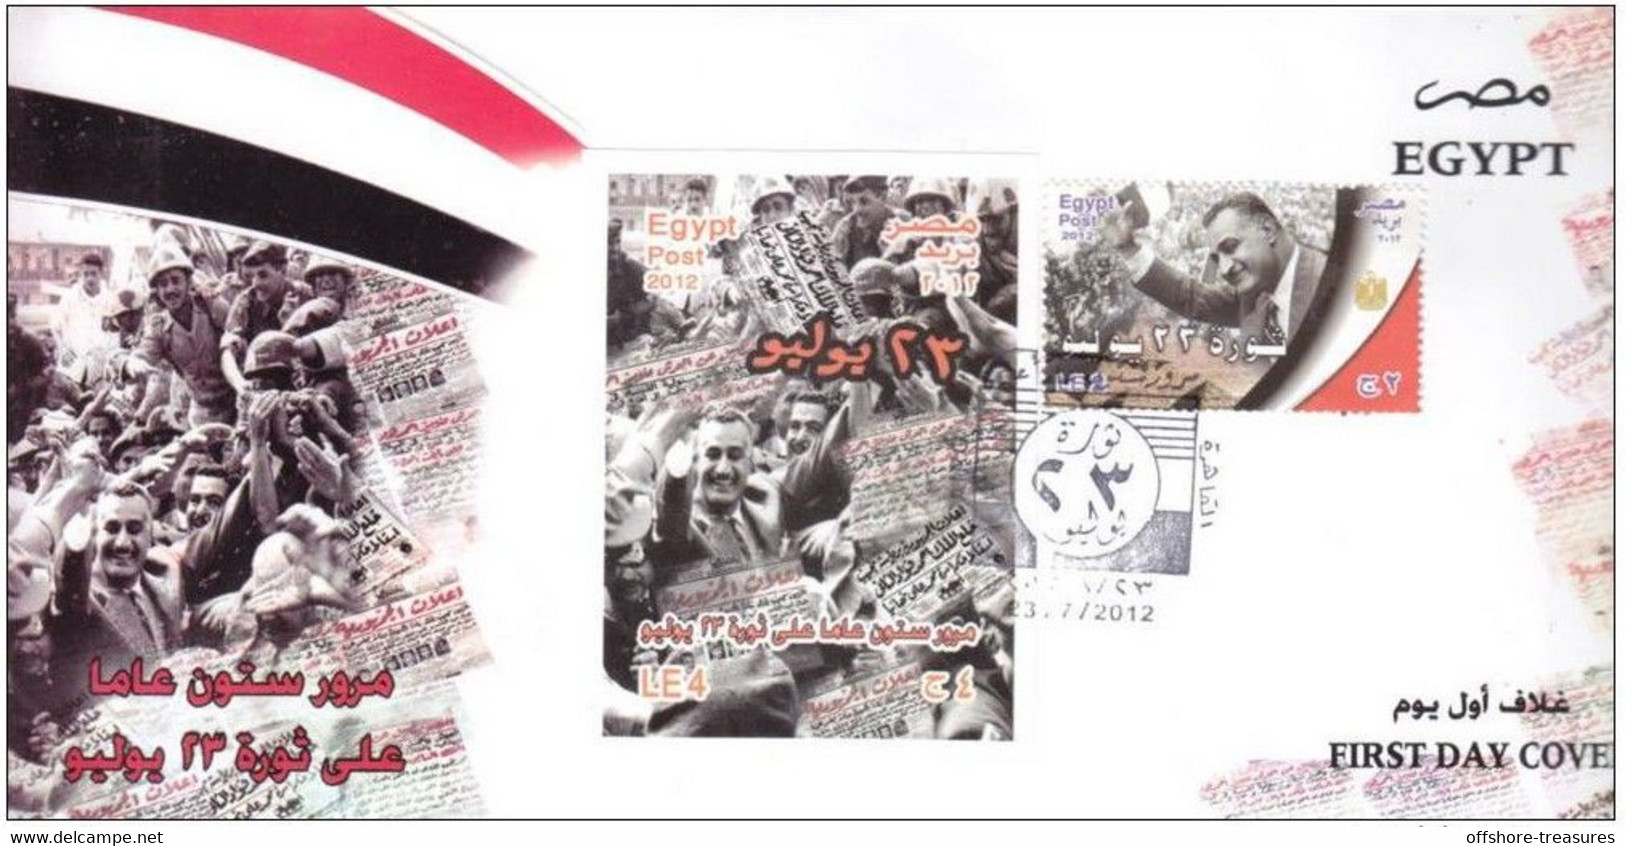 Egypt 2012 First Day Cover - Long FDC 60 Years Anniversary 23 July 1952 Revolution Nasser Stamp & SS Sheet Illustrated - Covers & Documents